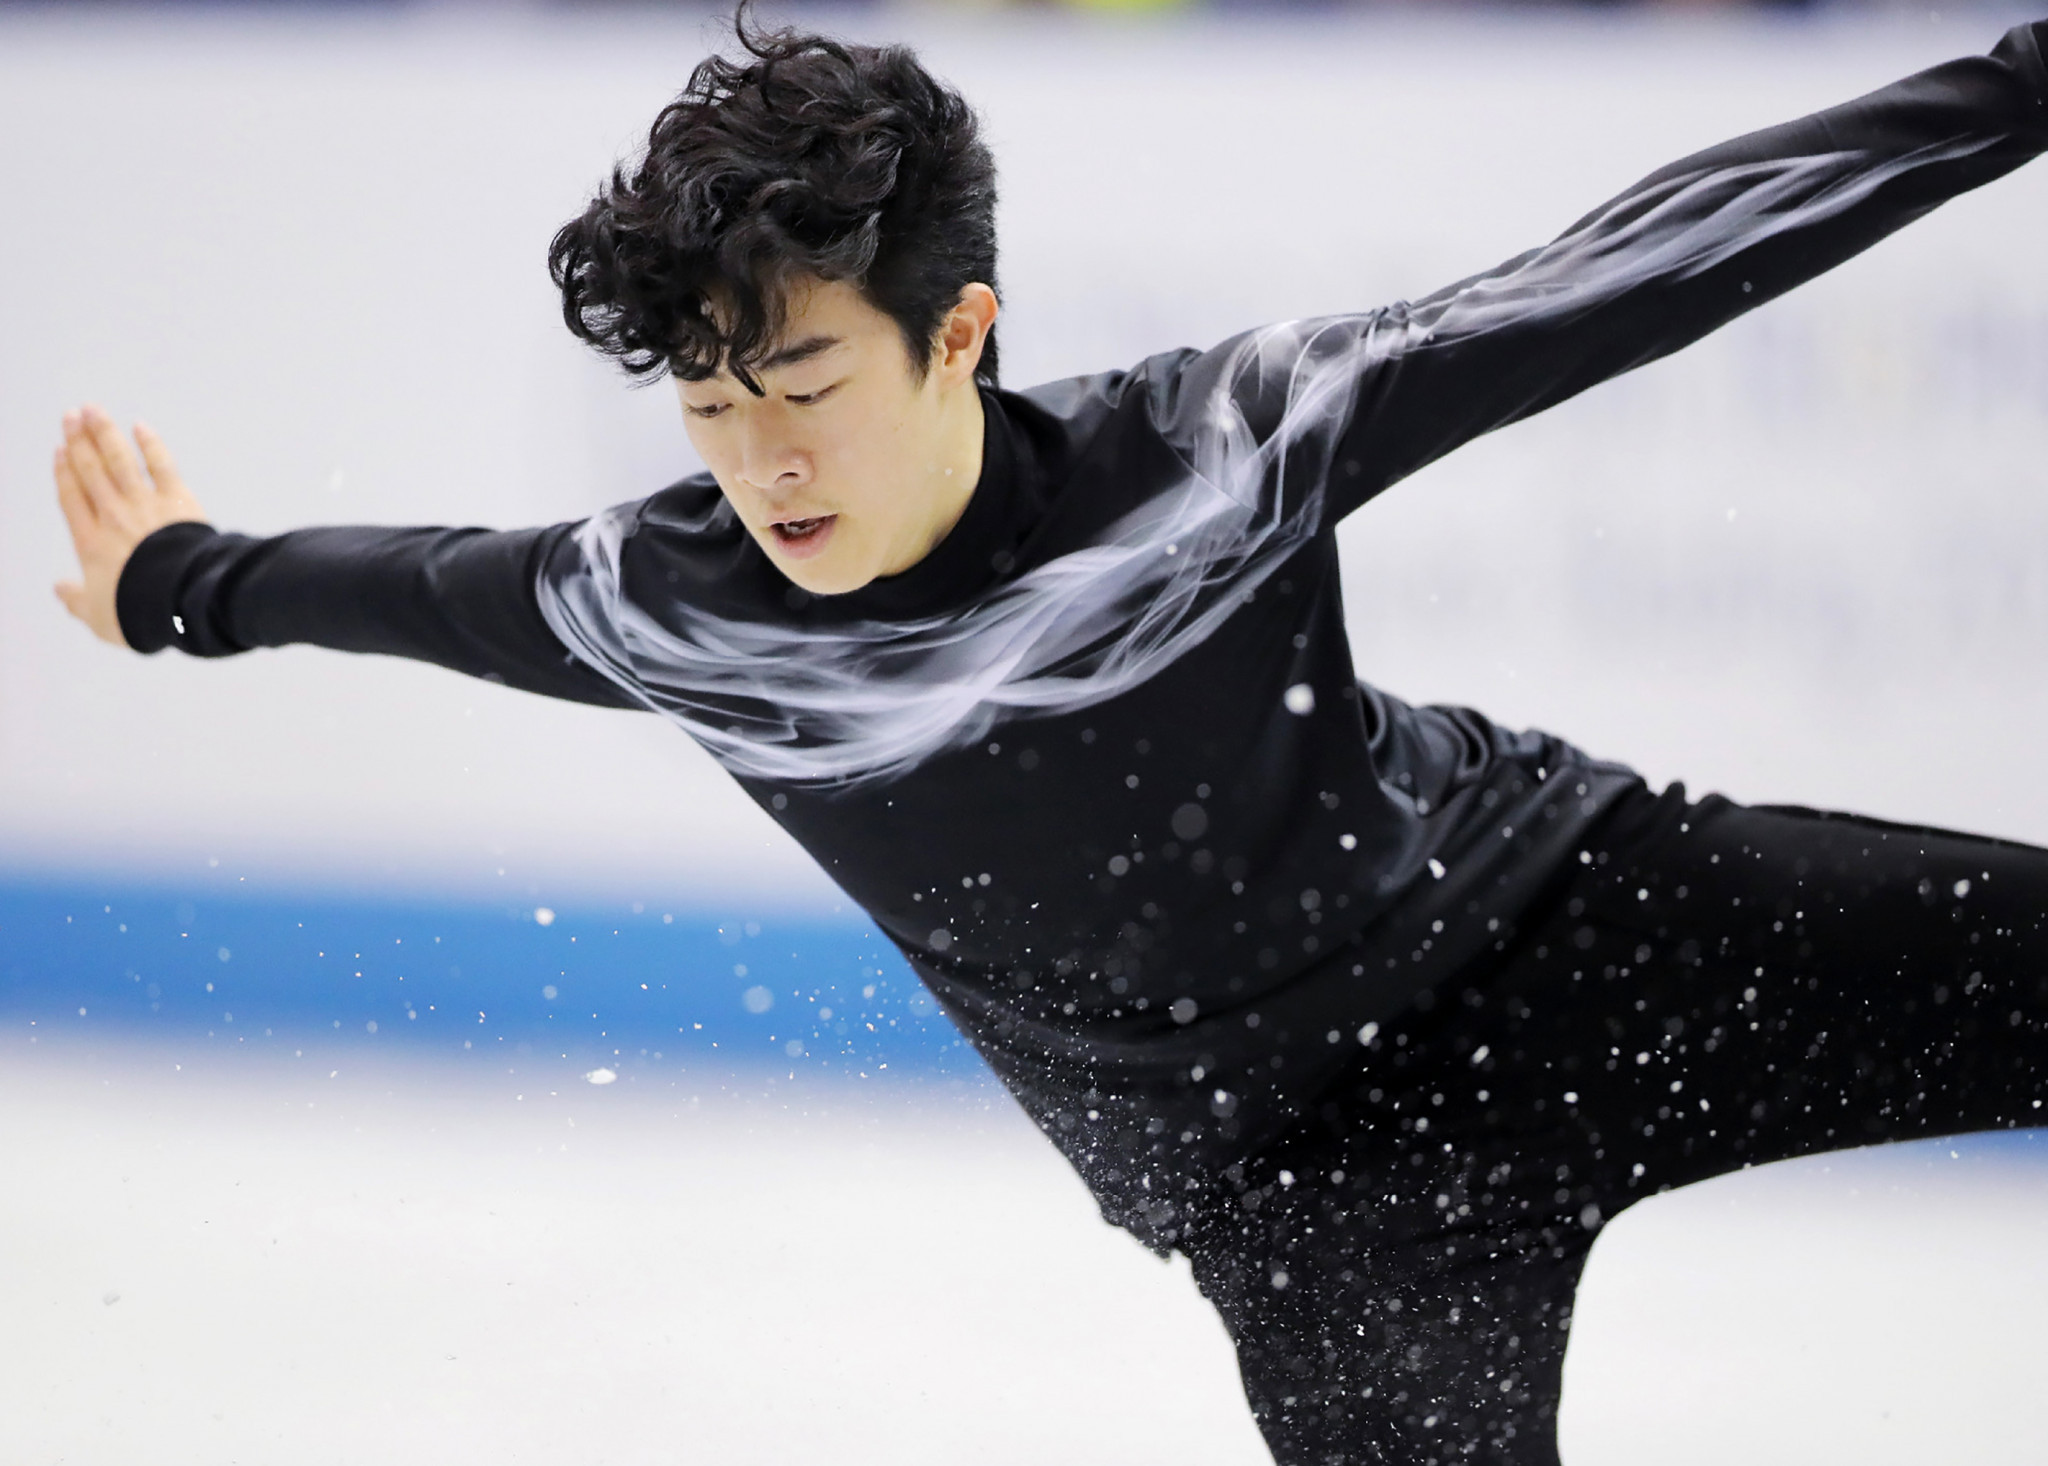 Chen leads men's competition at Skate America